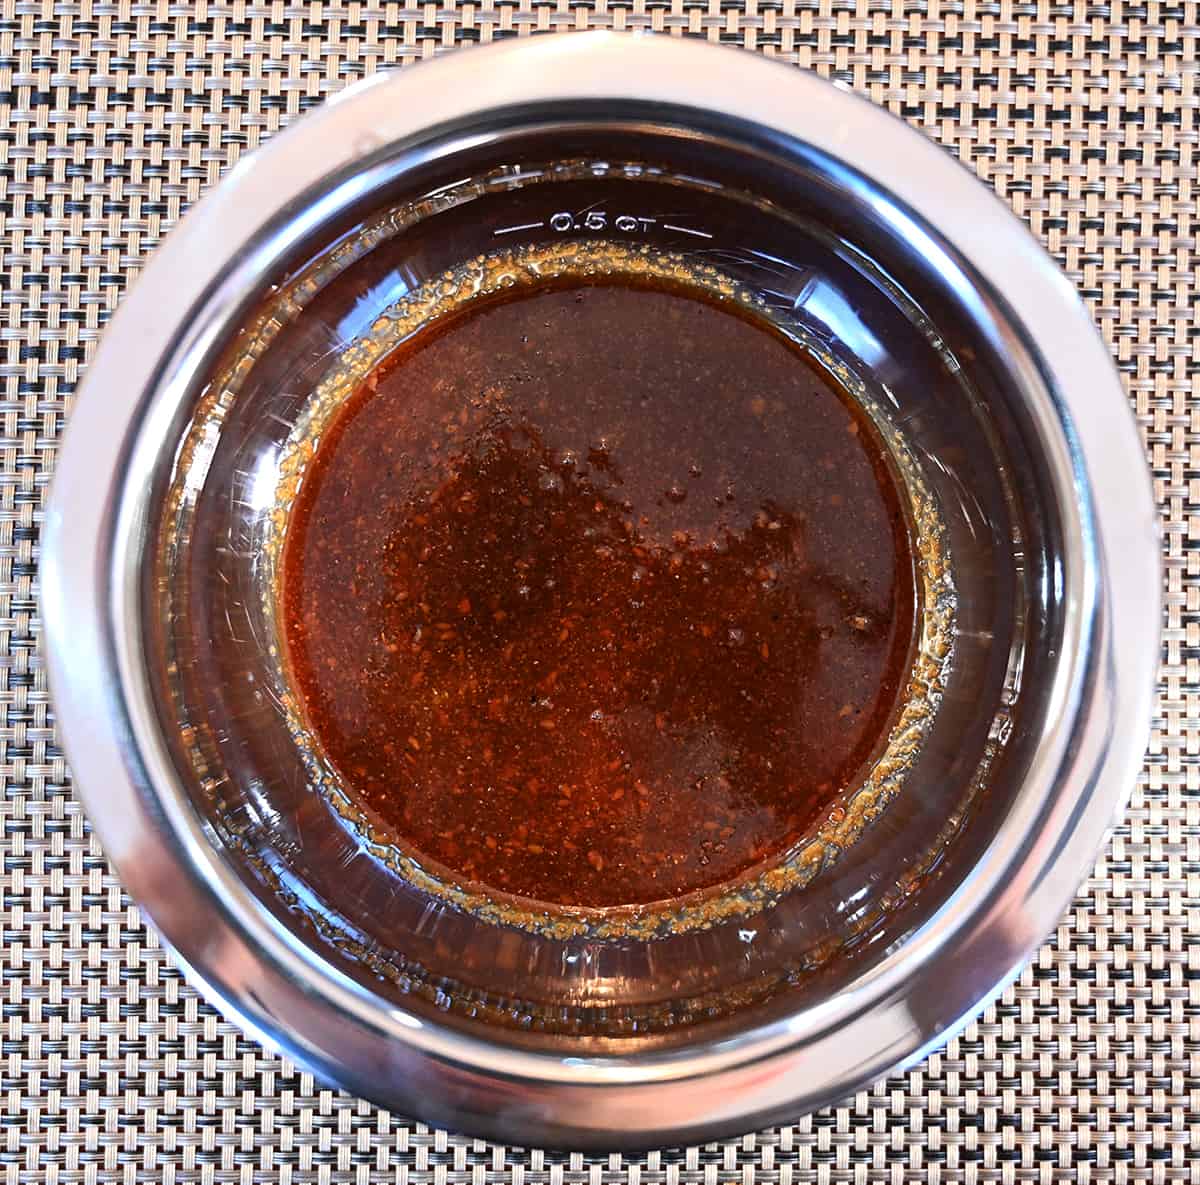 Top down image of a bowl with the marinade poured into it.